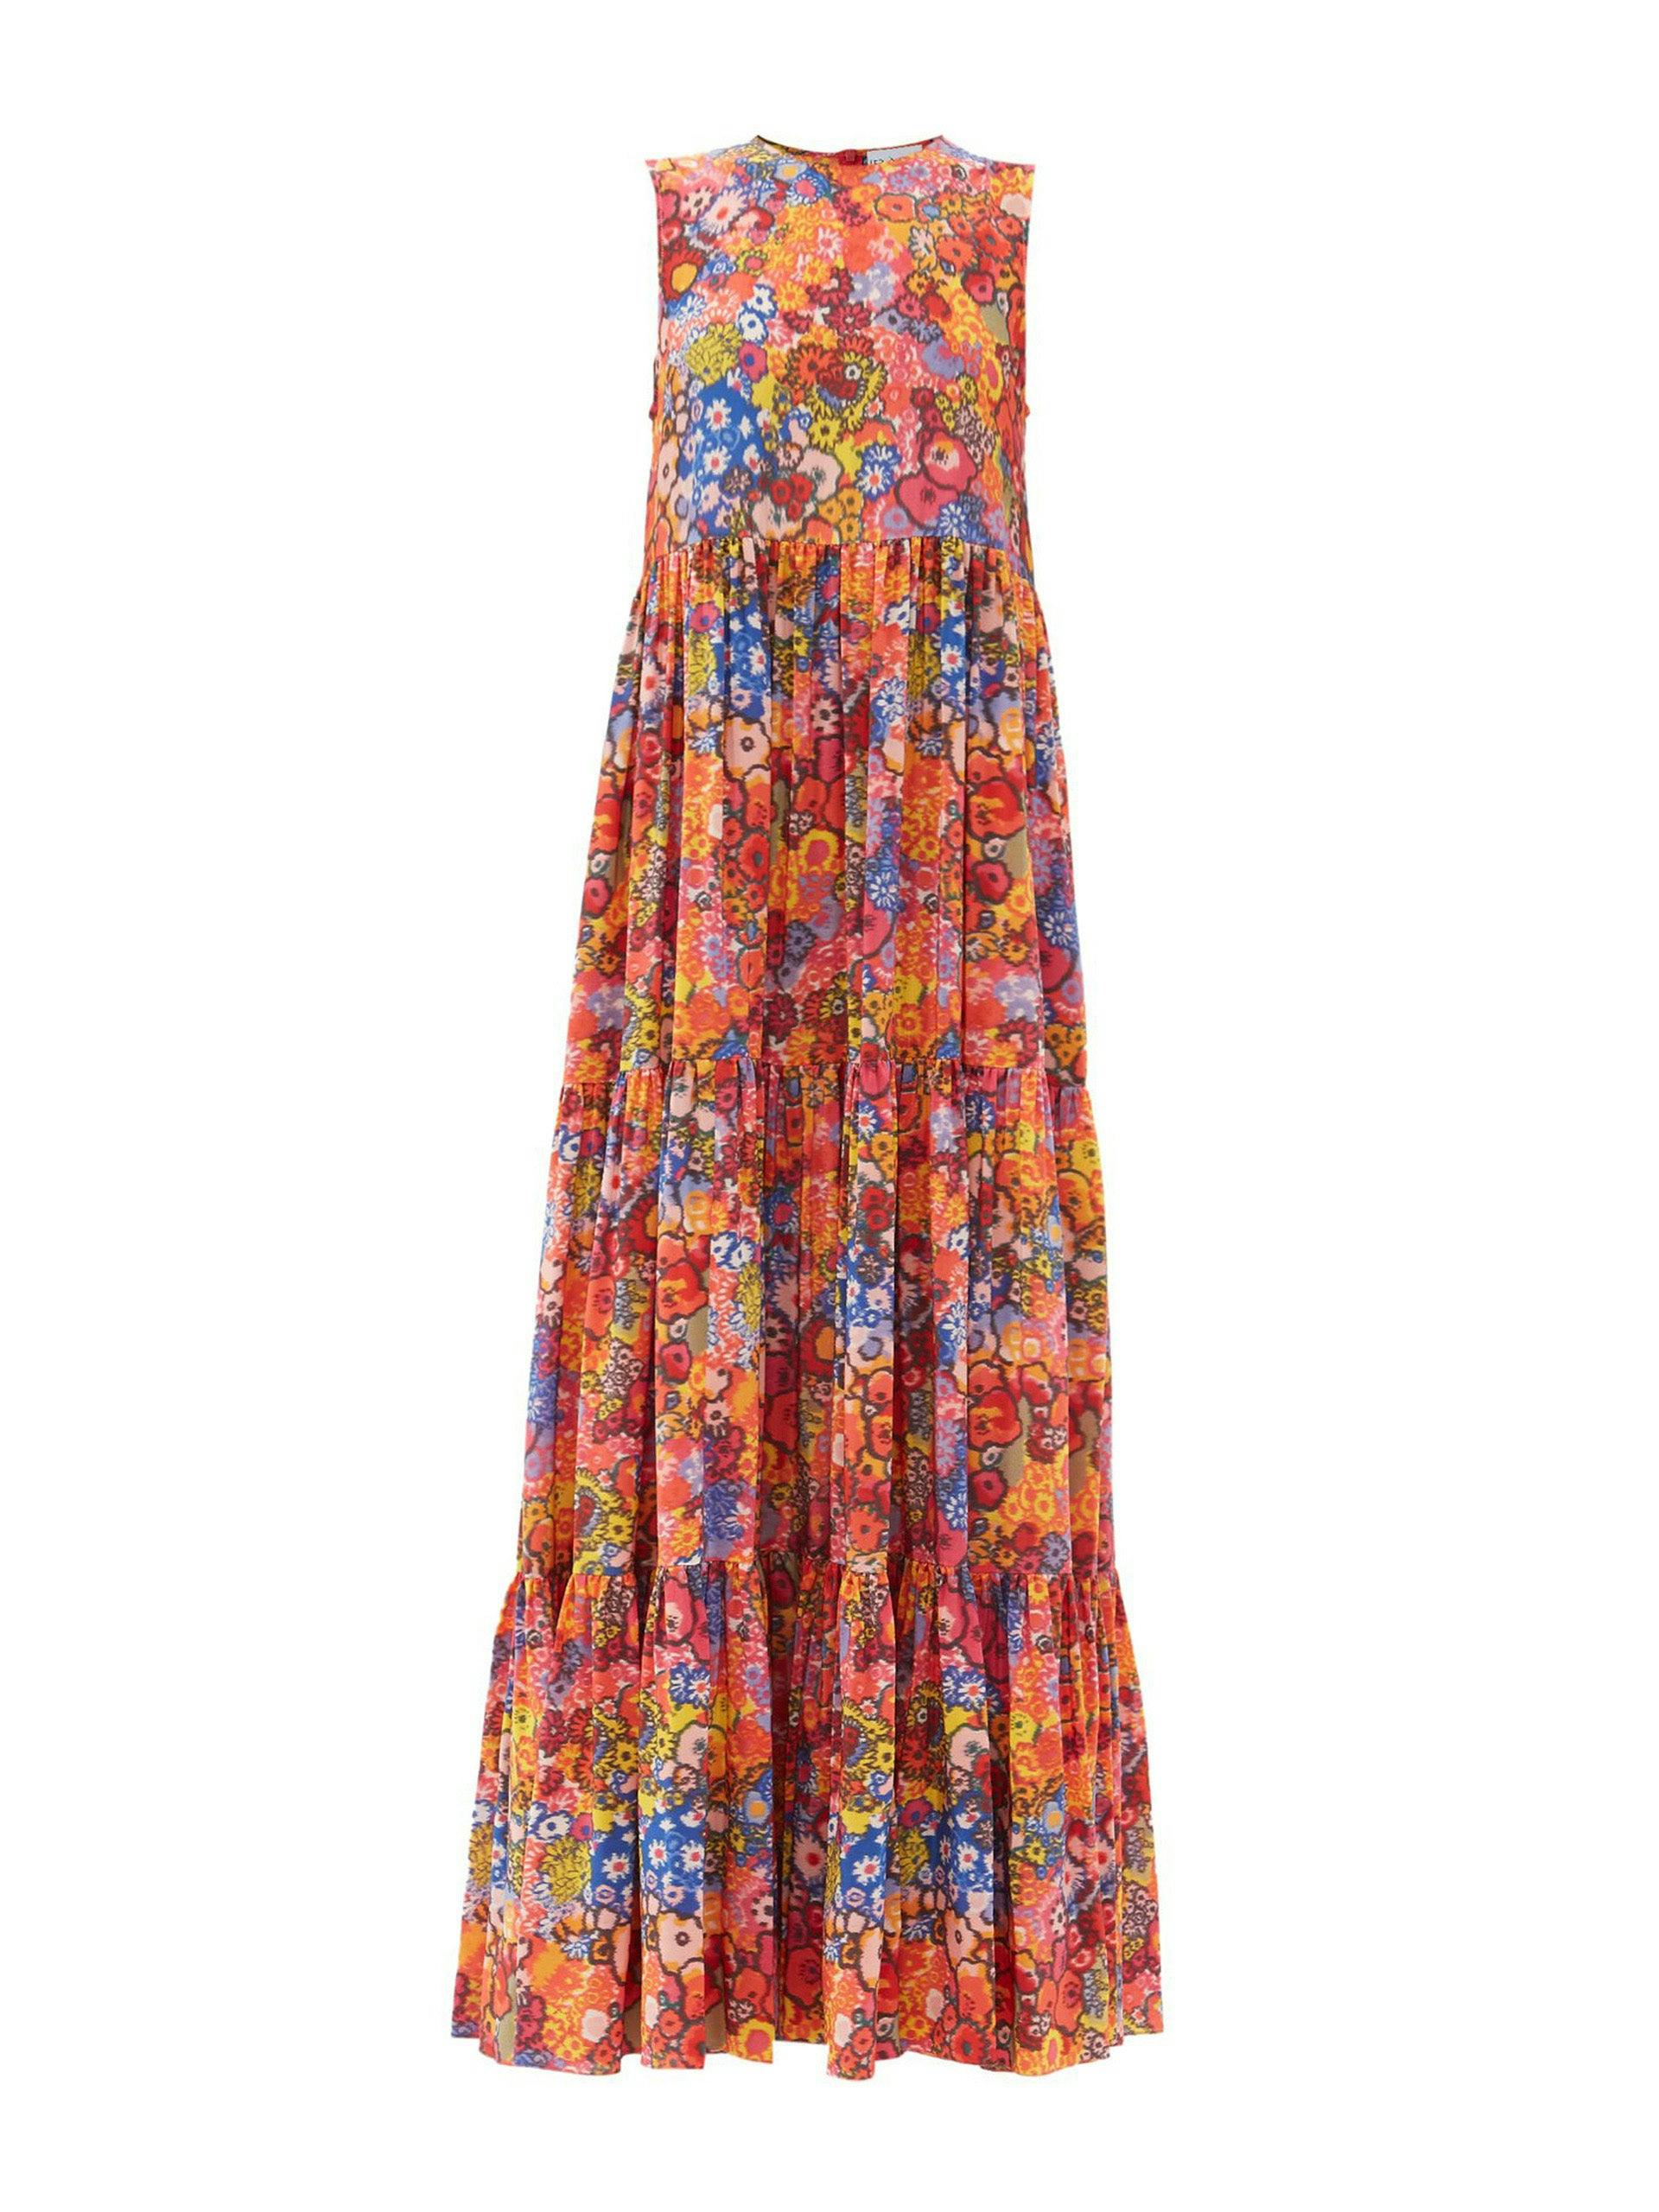 Psychedelic print mega-tiered silk dress